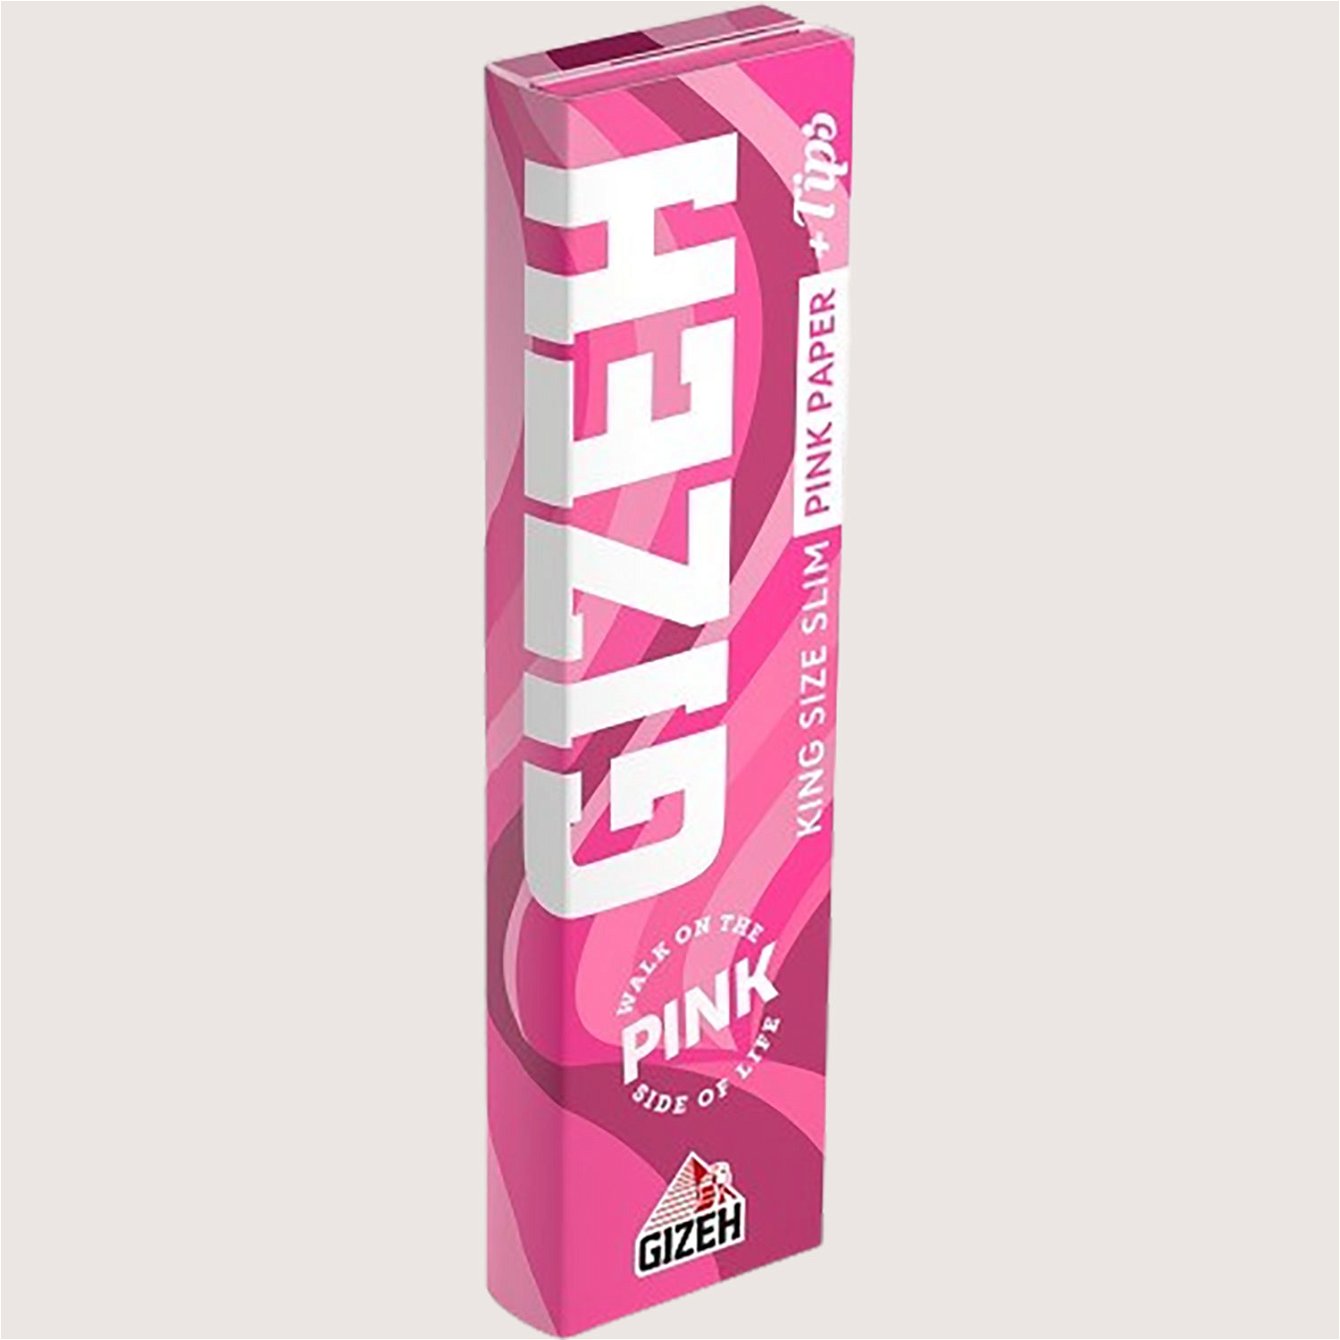 Gizeh All Pink King Size Slim + Tips 34 Blättchen